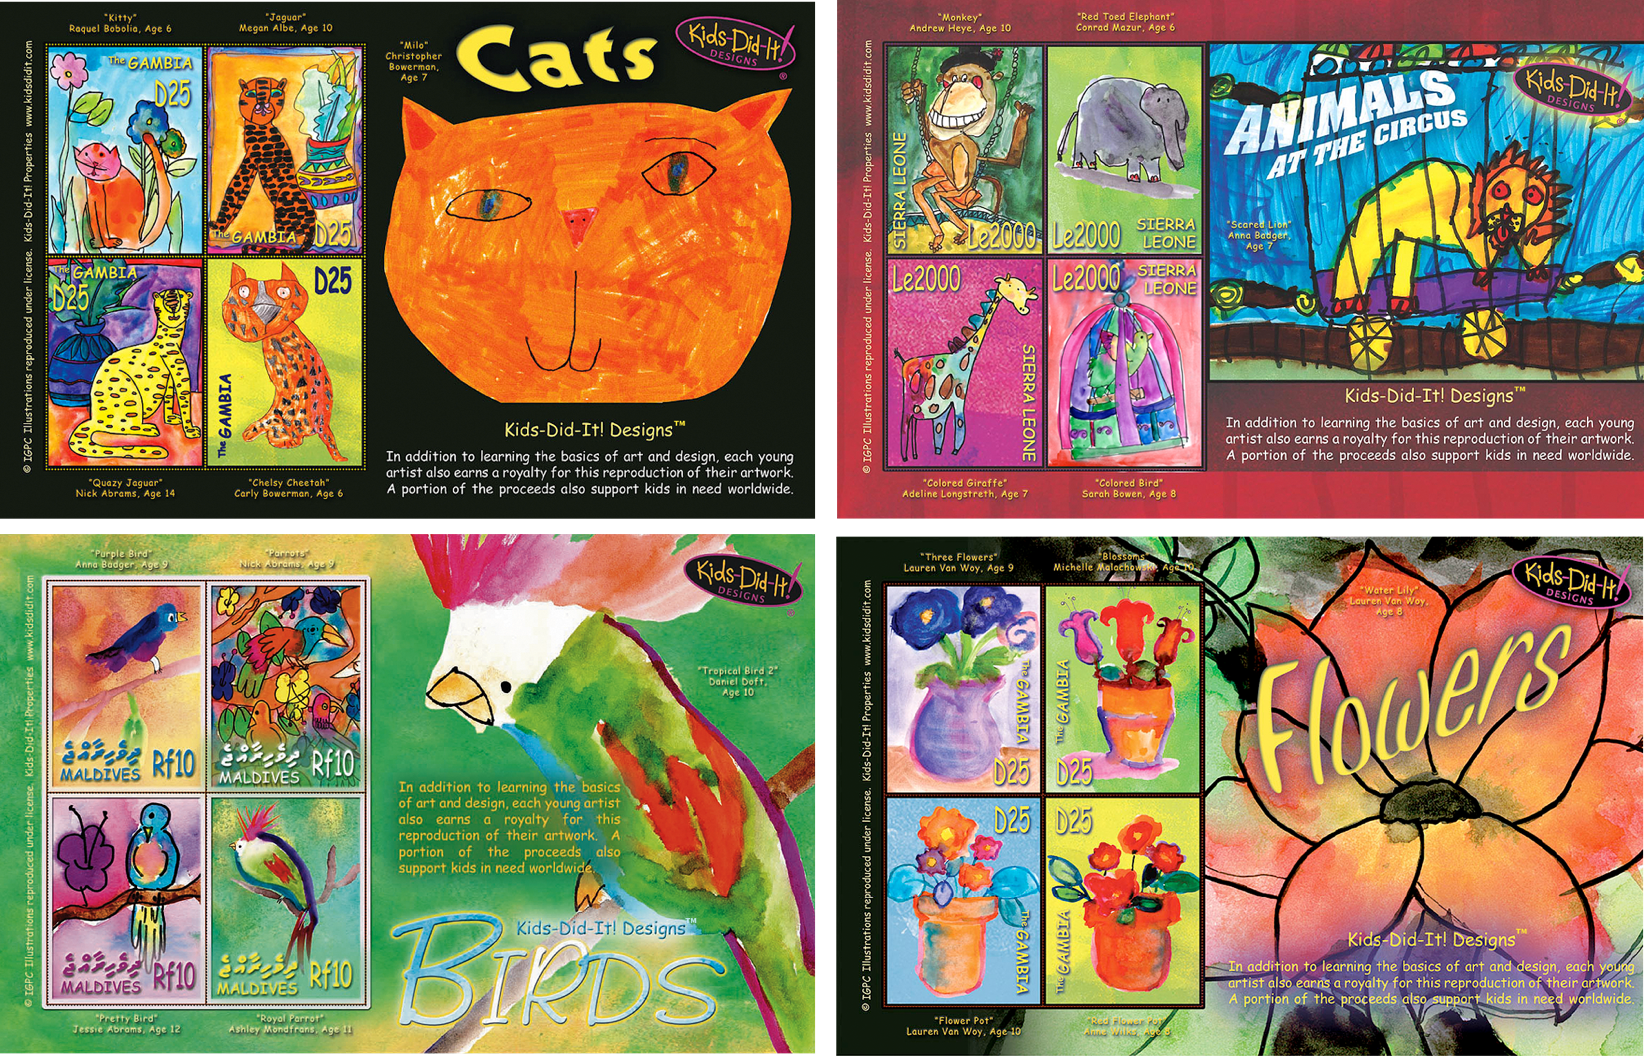 Cats, Brids, Animals, Flowers postage stamps featuring original art created by chidren.